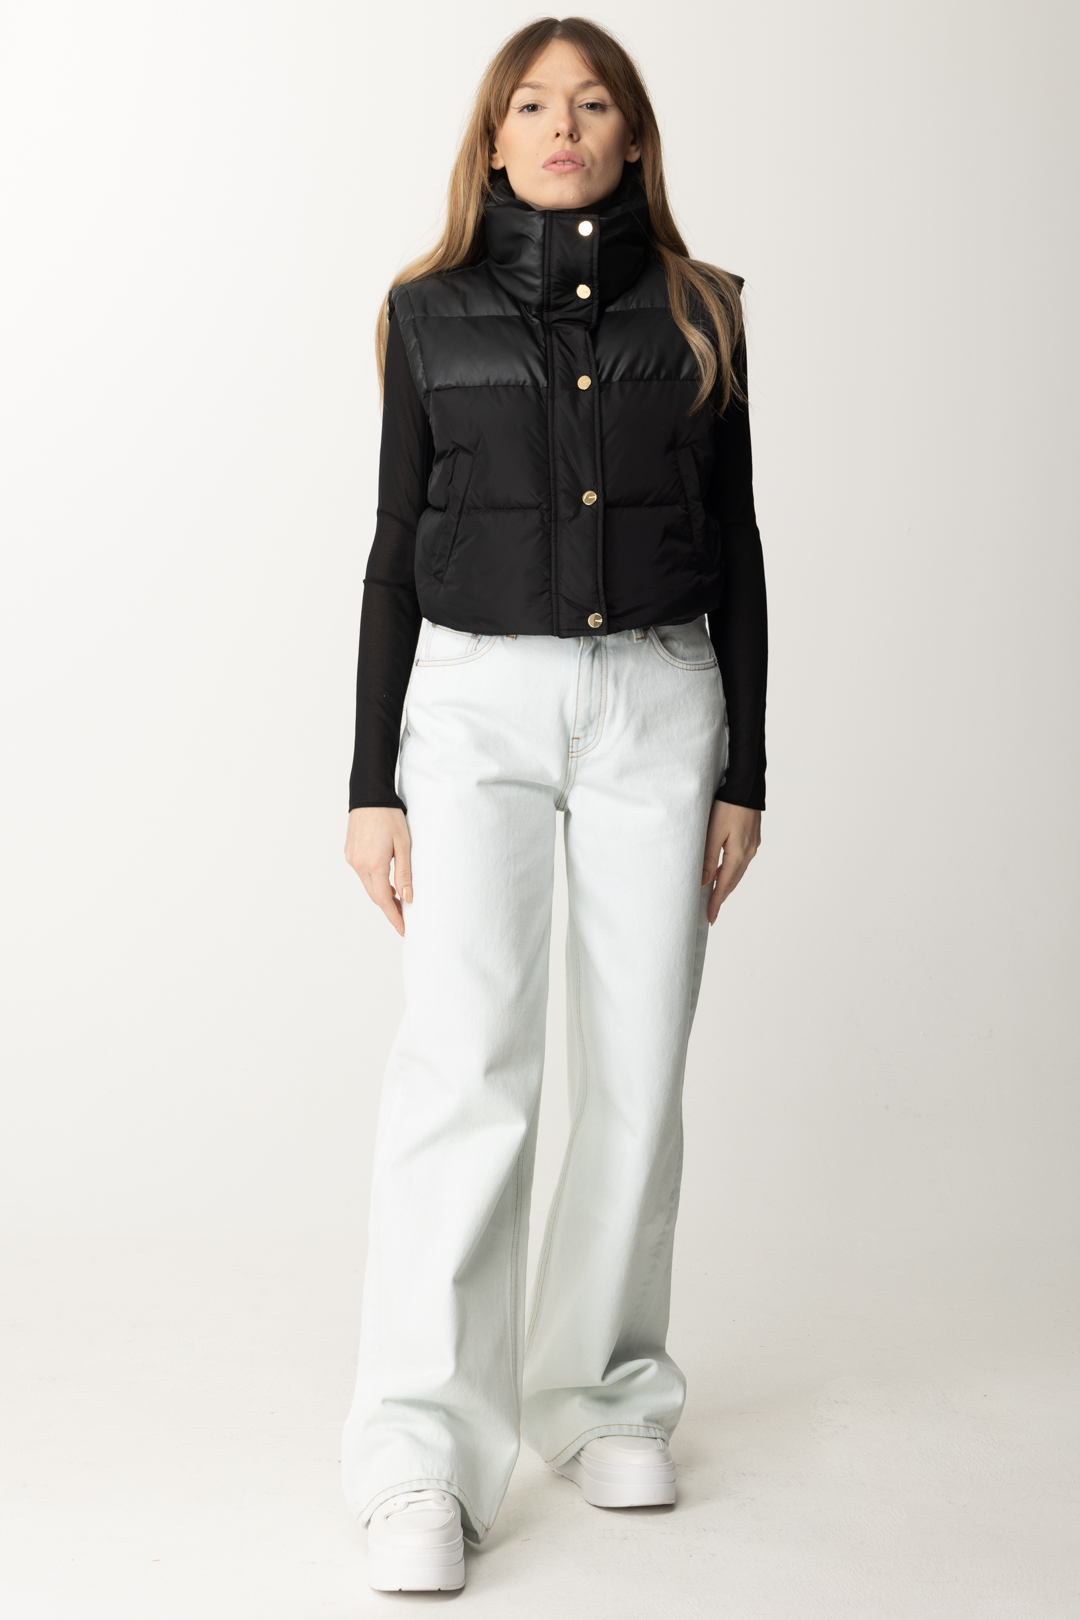 Preview: Pinko Short padded vest with high neck NERO LIMOUSINE